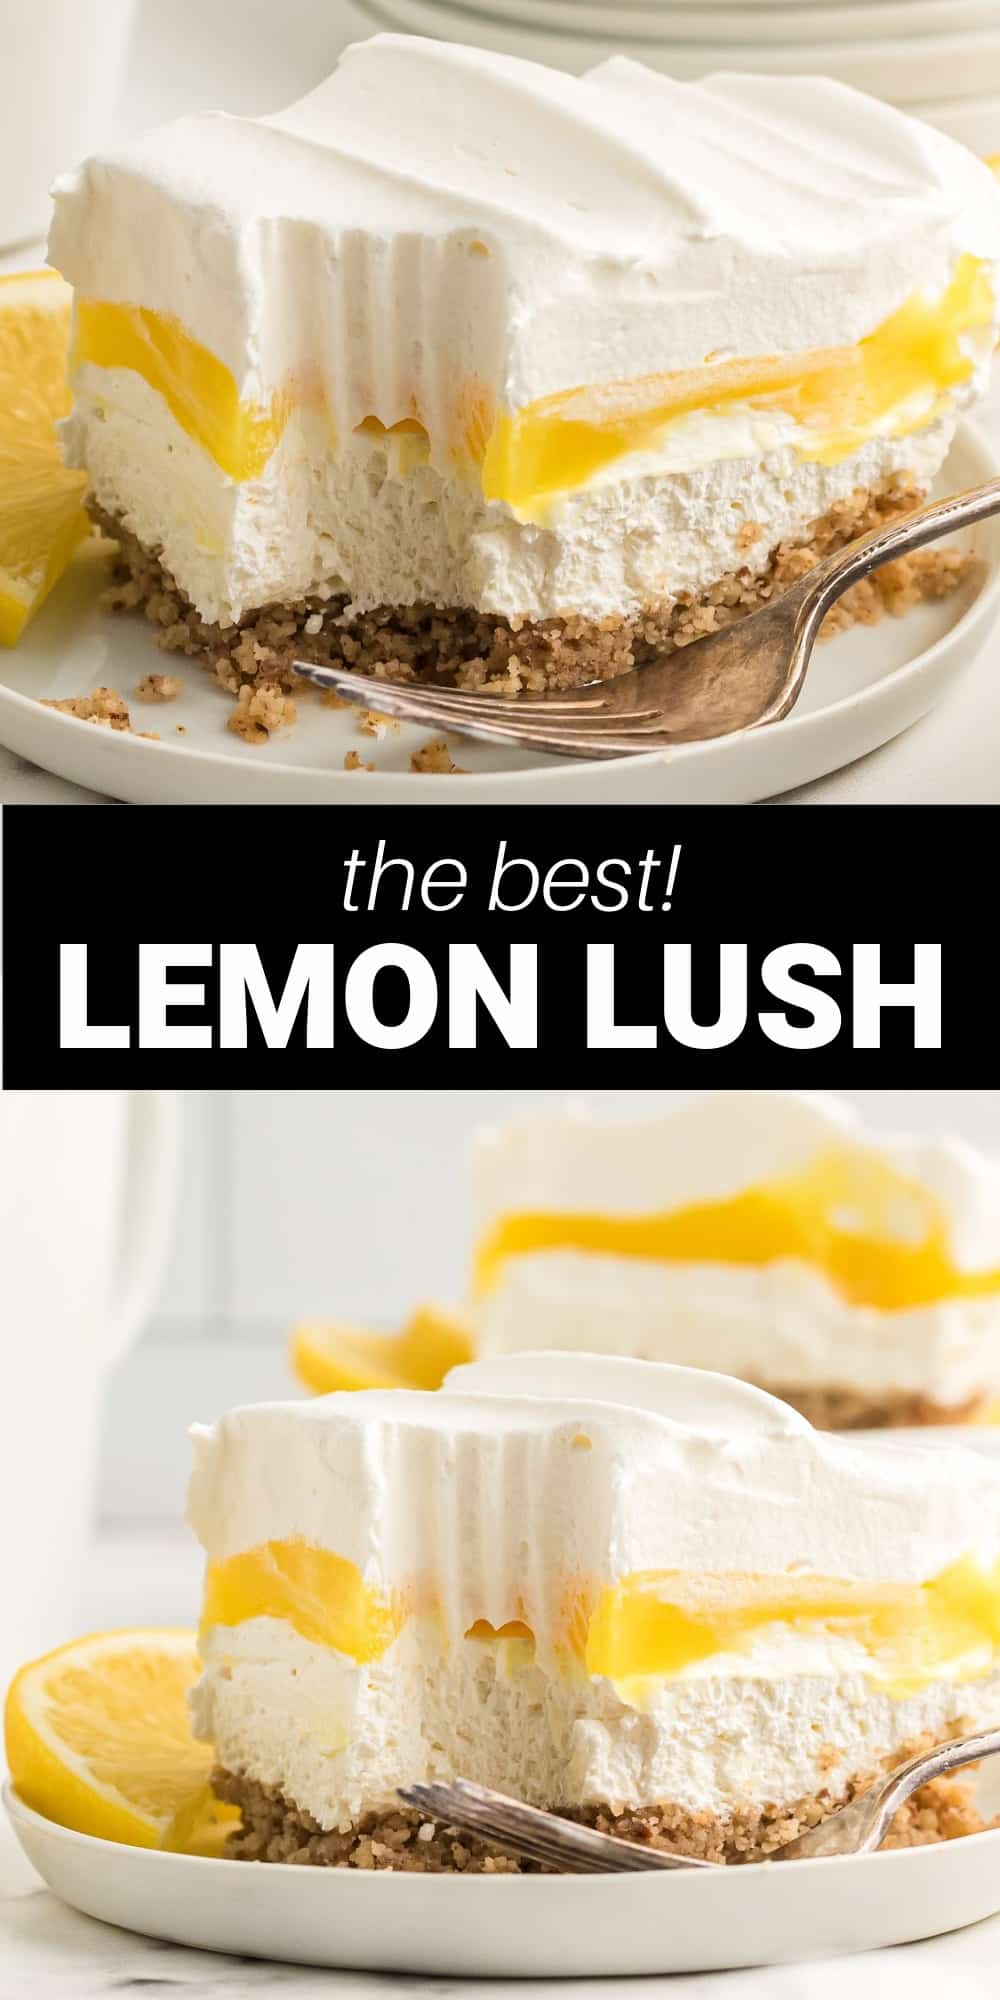 This Lemon Lush dessert is a refreshing and light lemon dessert that's perfect for spring and summer. It's an easy layered dessert with creamy layers of cheesecake using cream cheese, lemon pudding, and whipped cream on an amazing pecan crust!